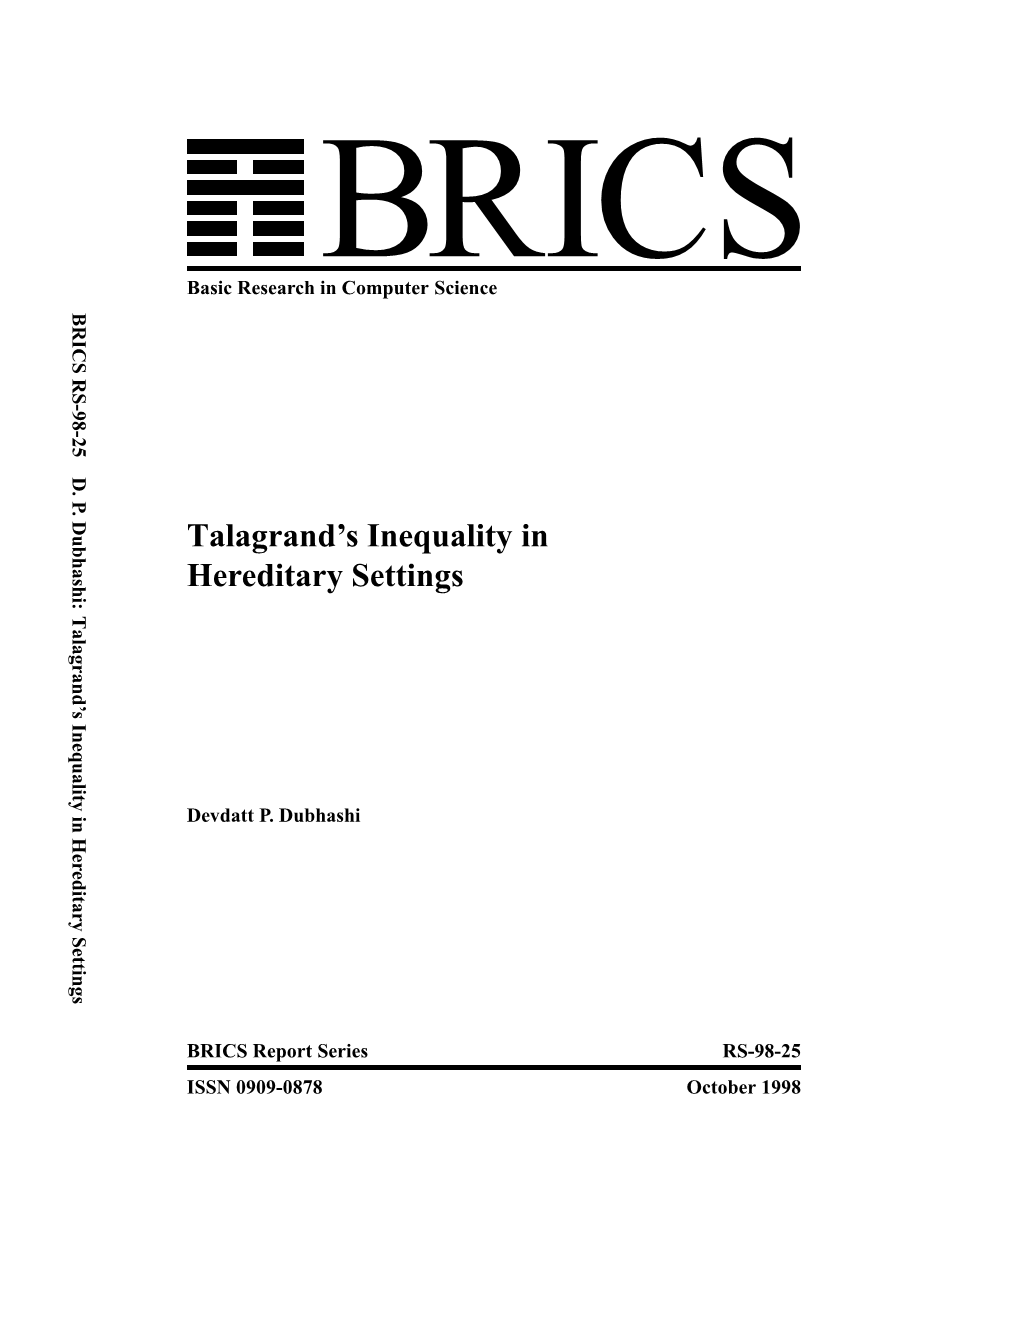 Talagrand's Inequality in Hereditary Settings